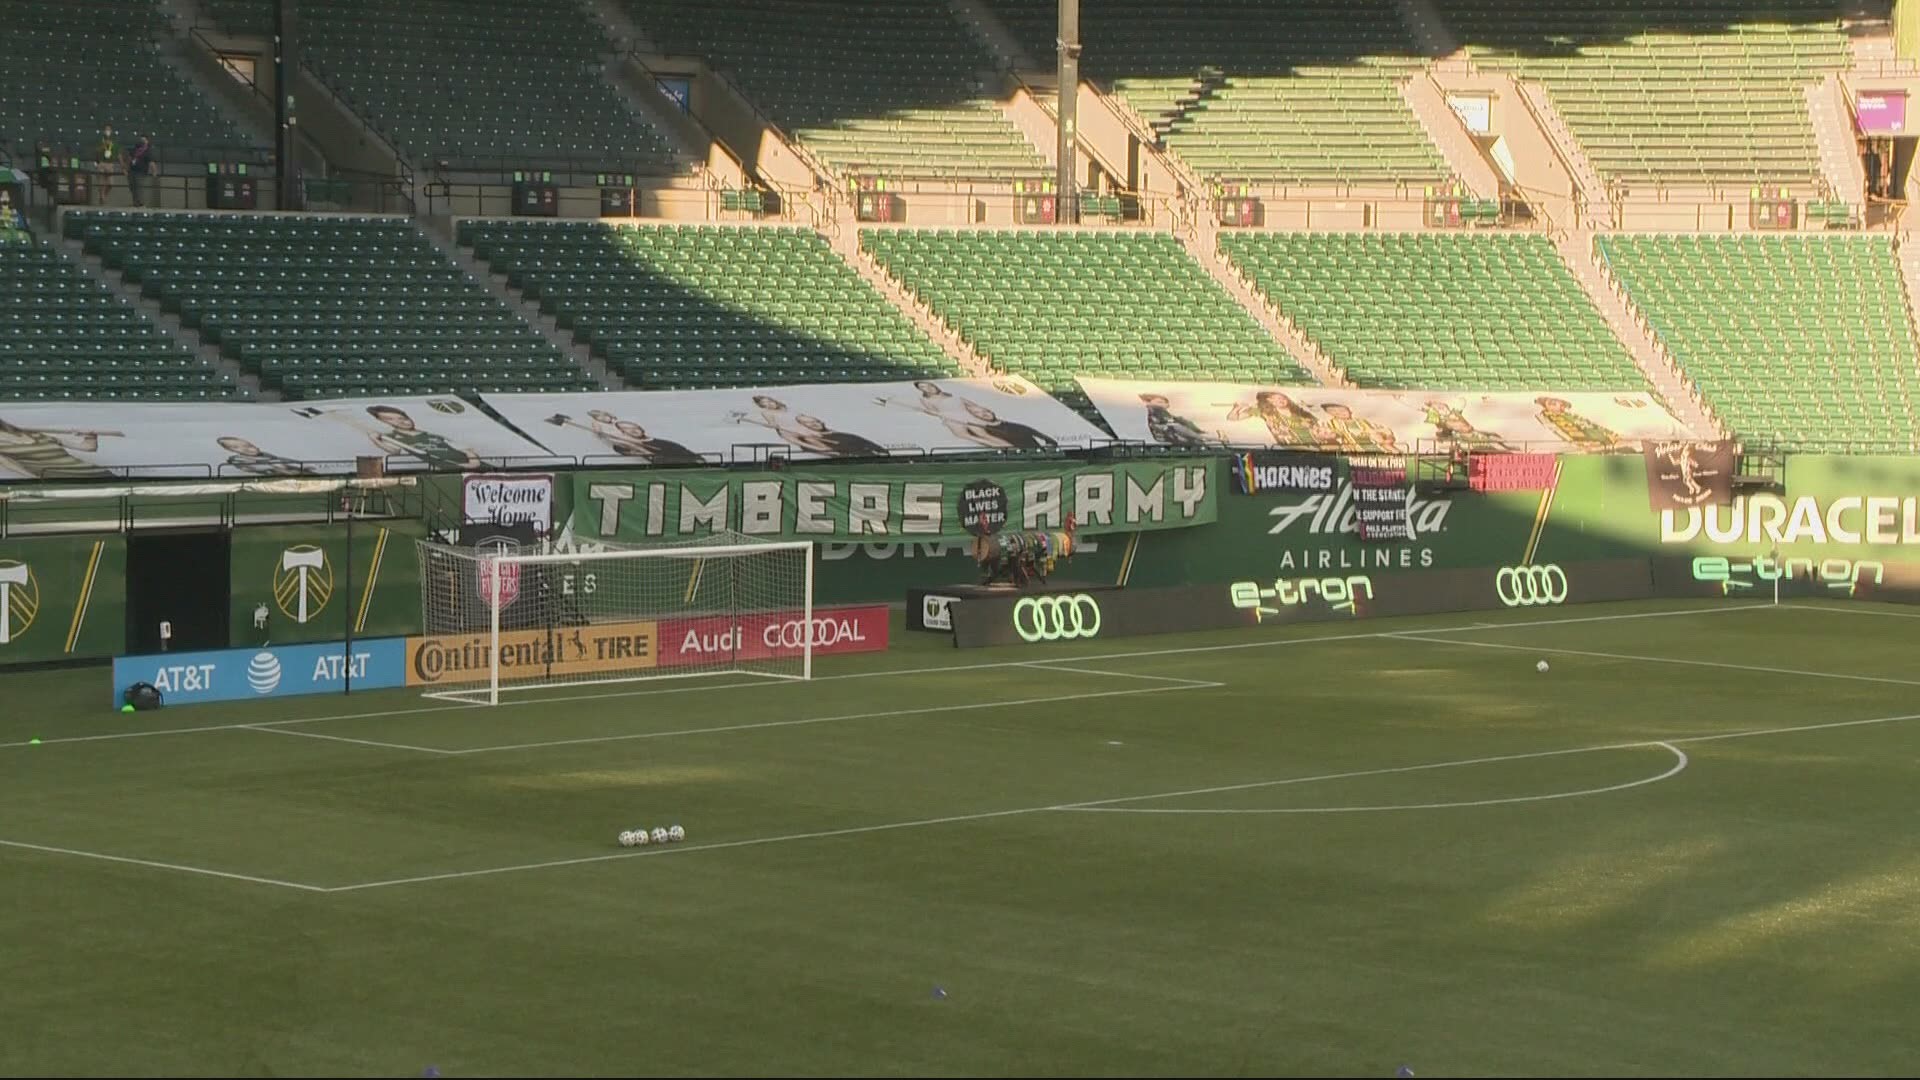 Some fans will be allowed to attend Timbers and Thorns matches this year, according to Oregon health officials.